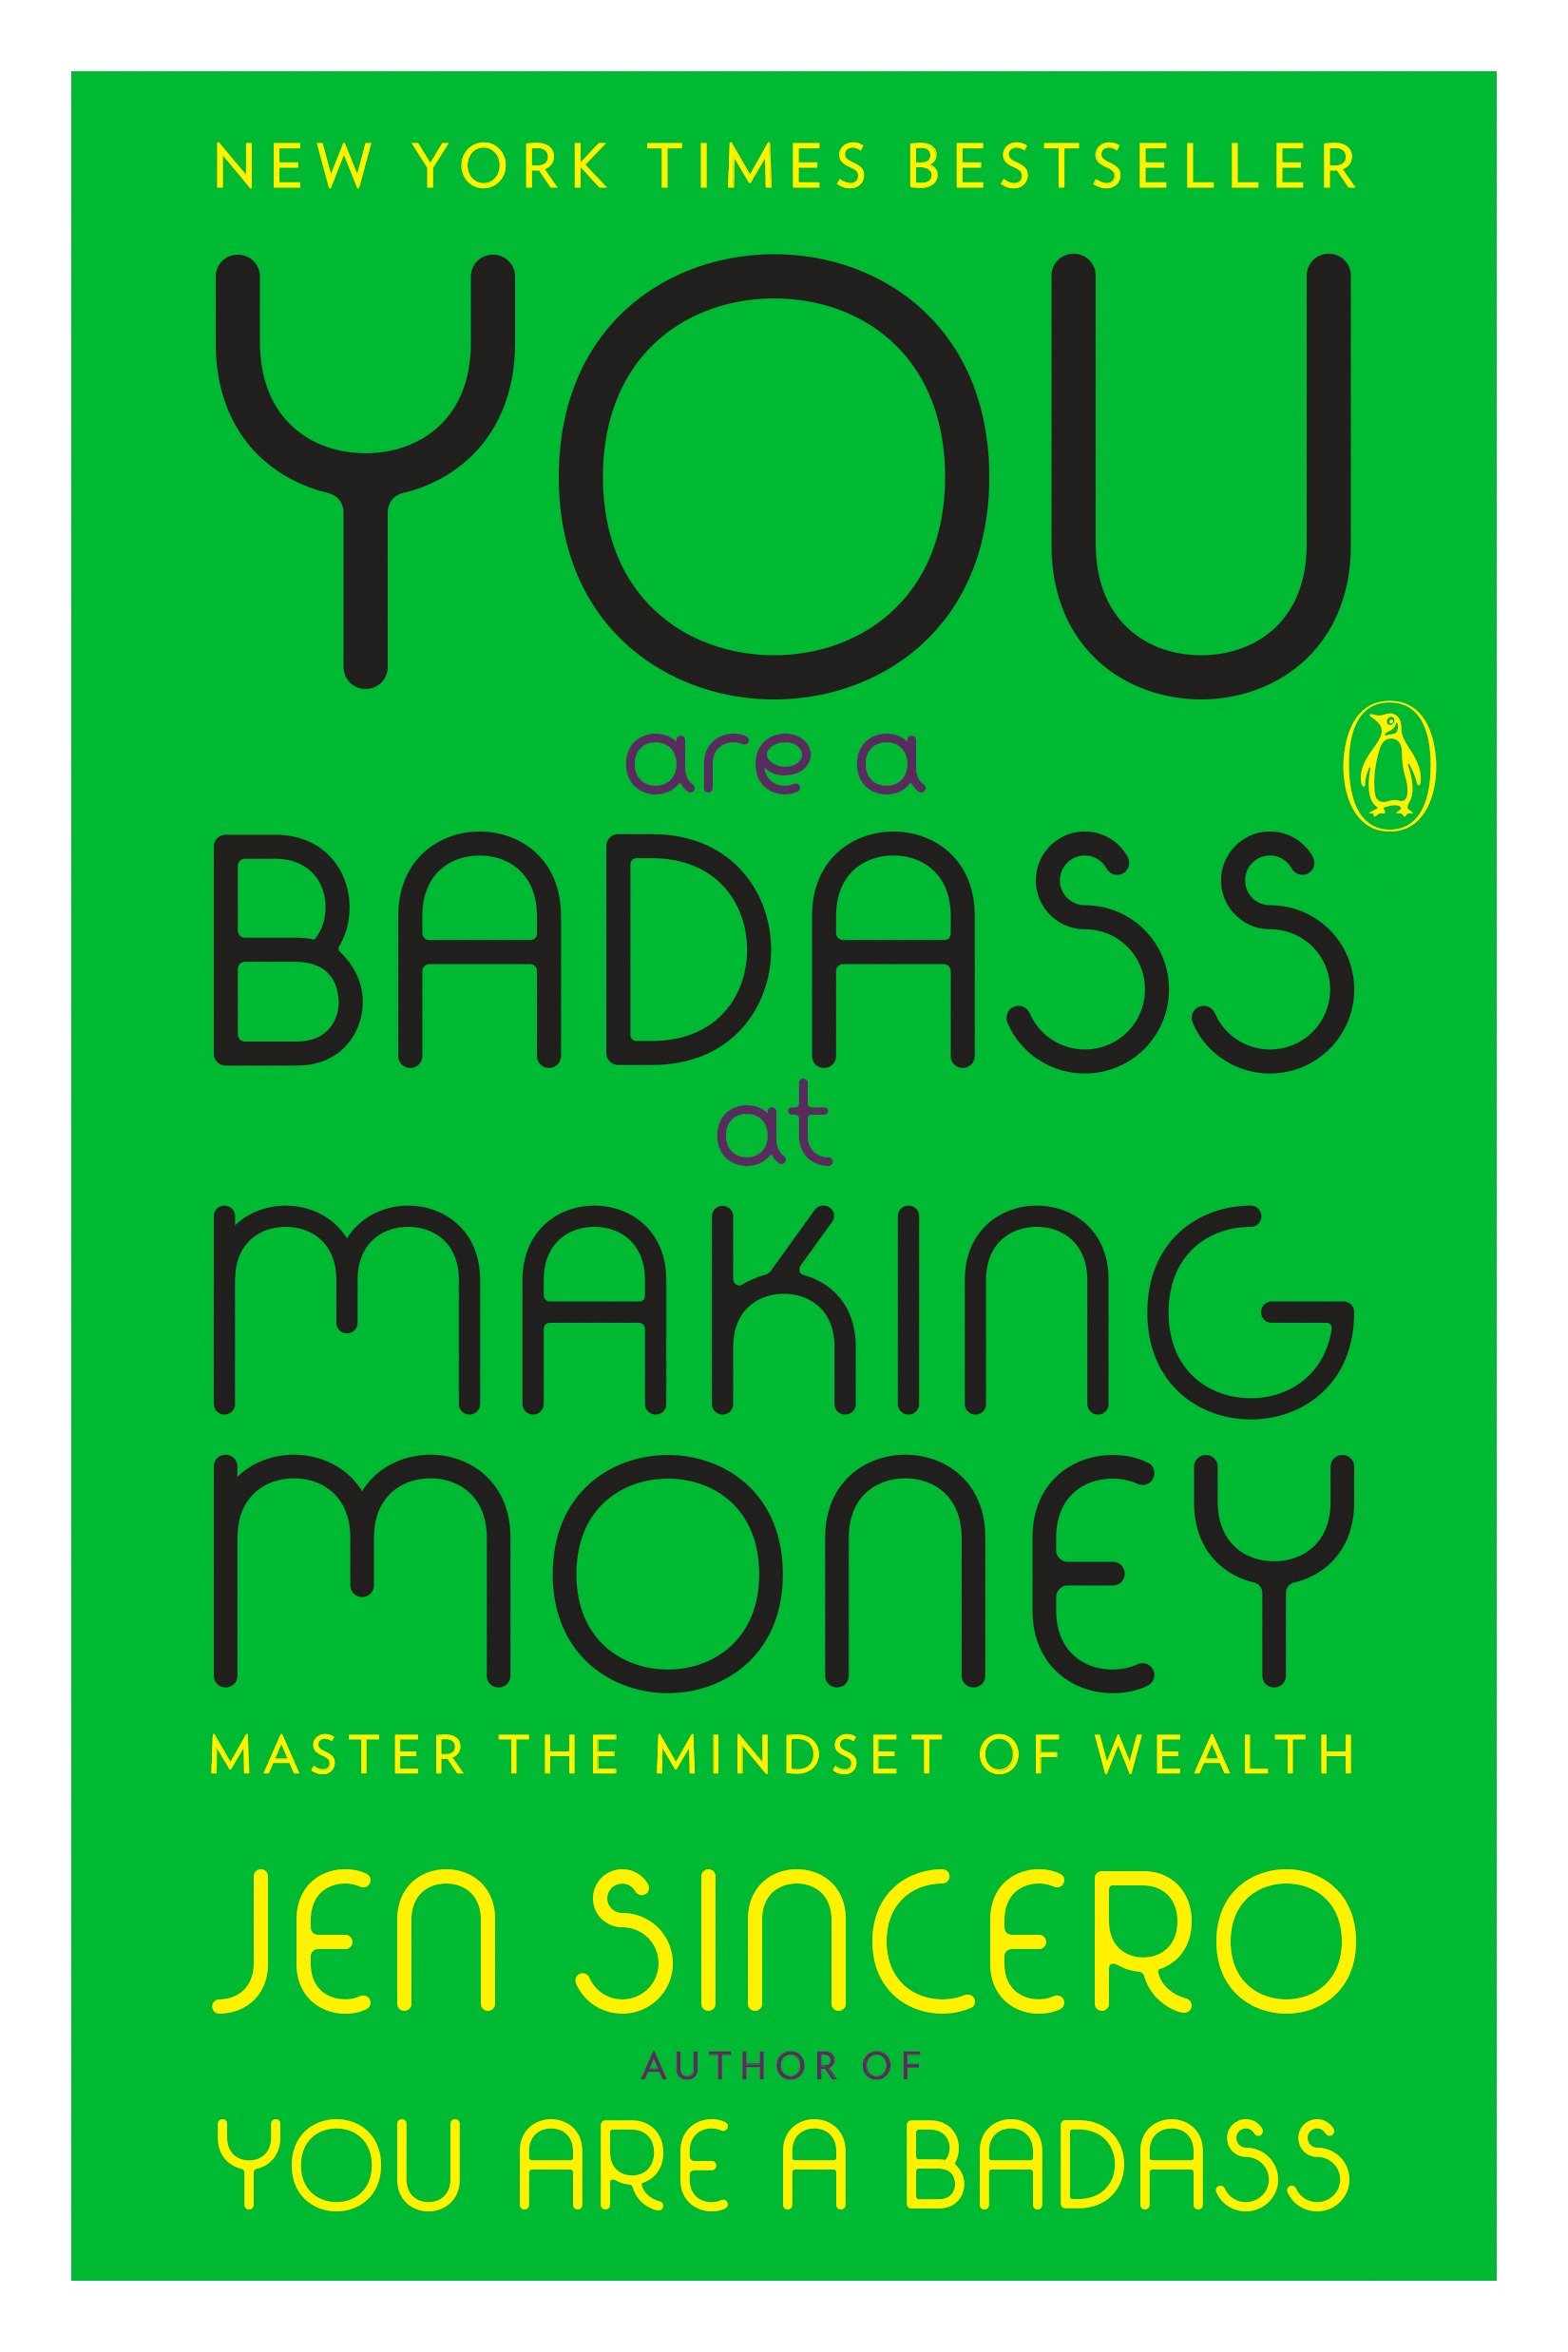 You Are a Badass at Making Money : Master the Mindset of Wealth (Paperback) - image 1 of 2